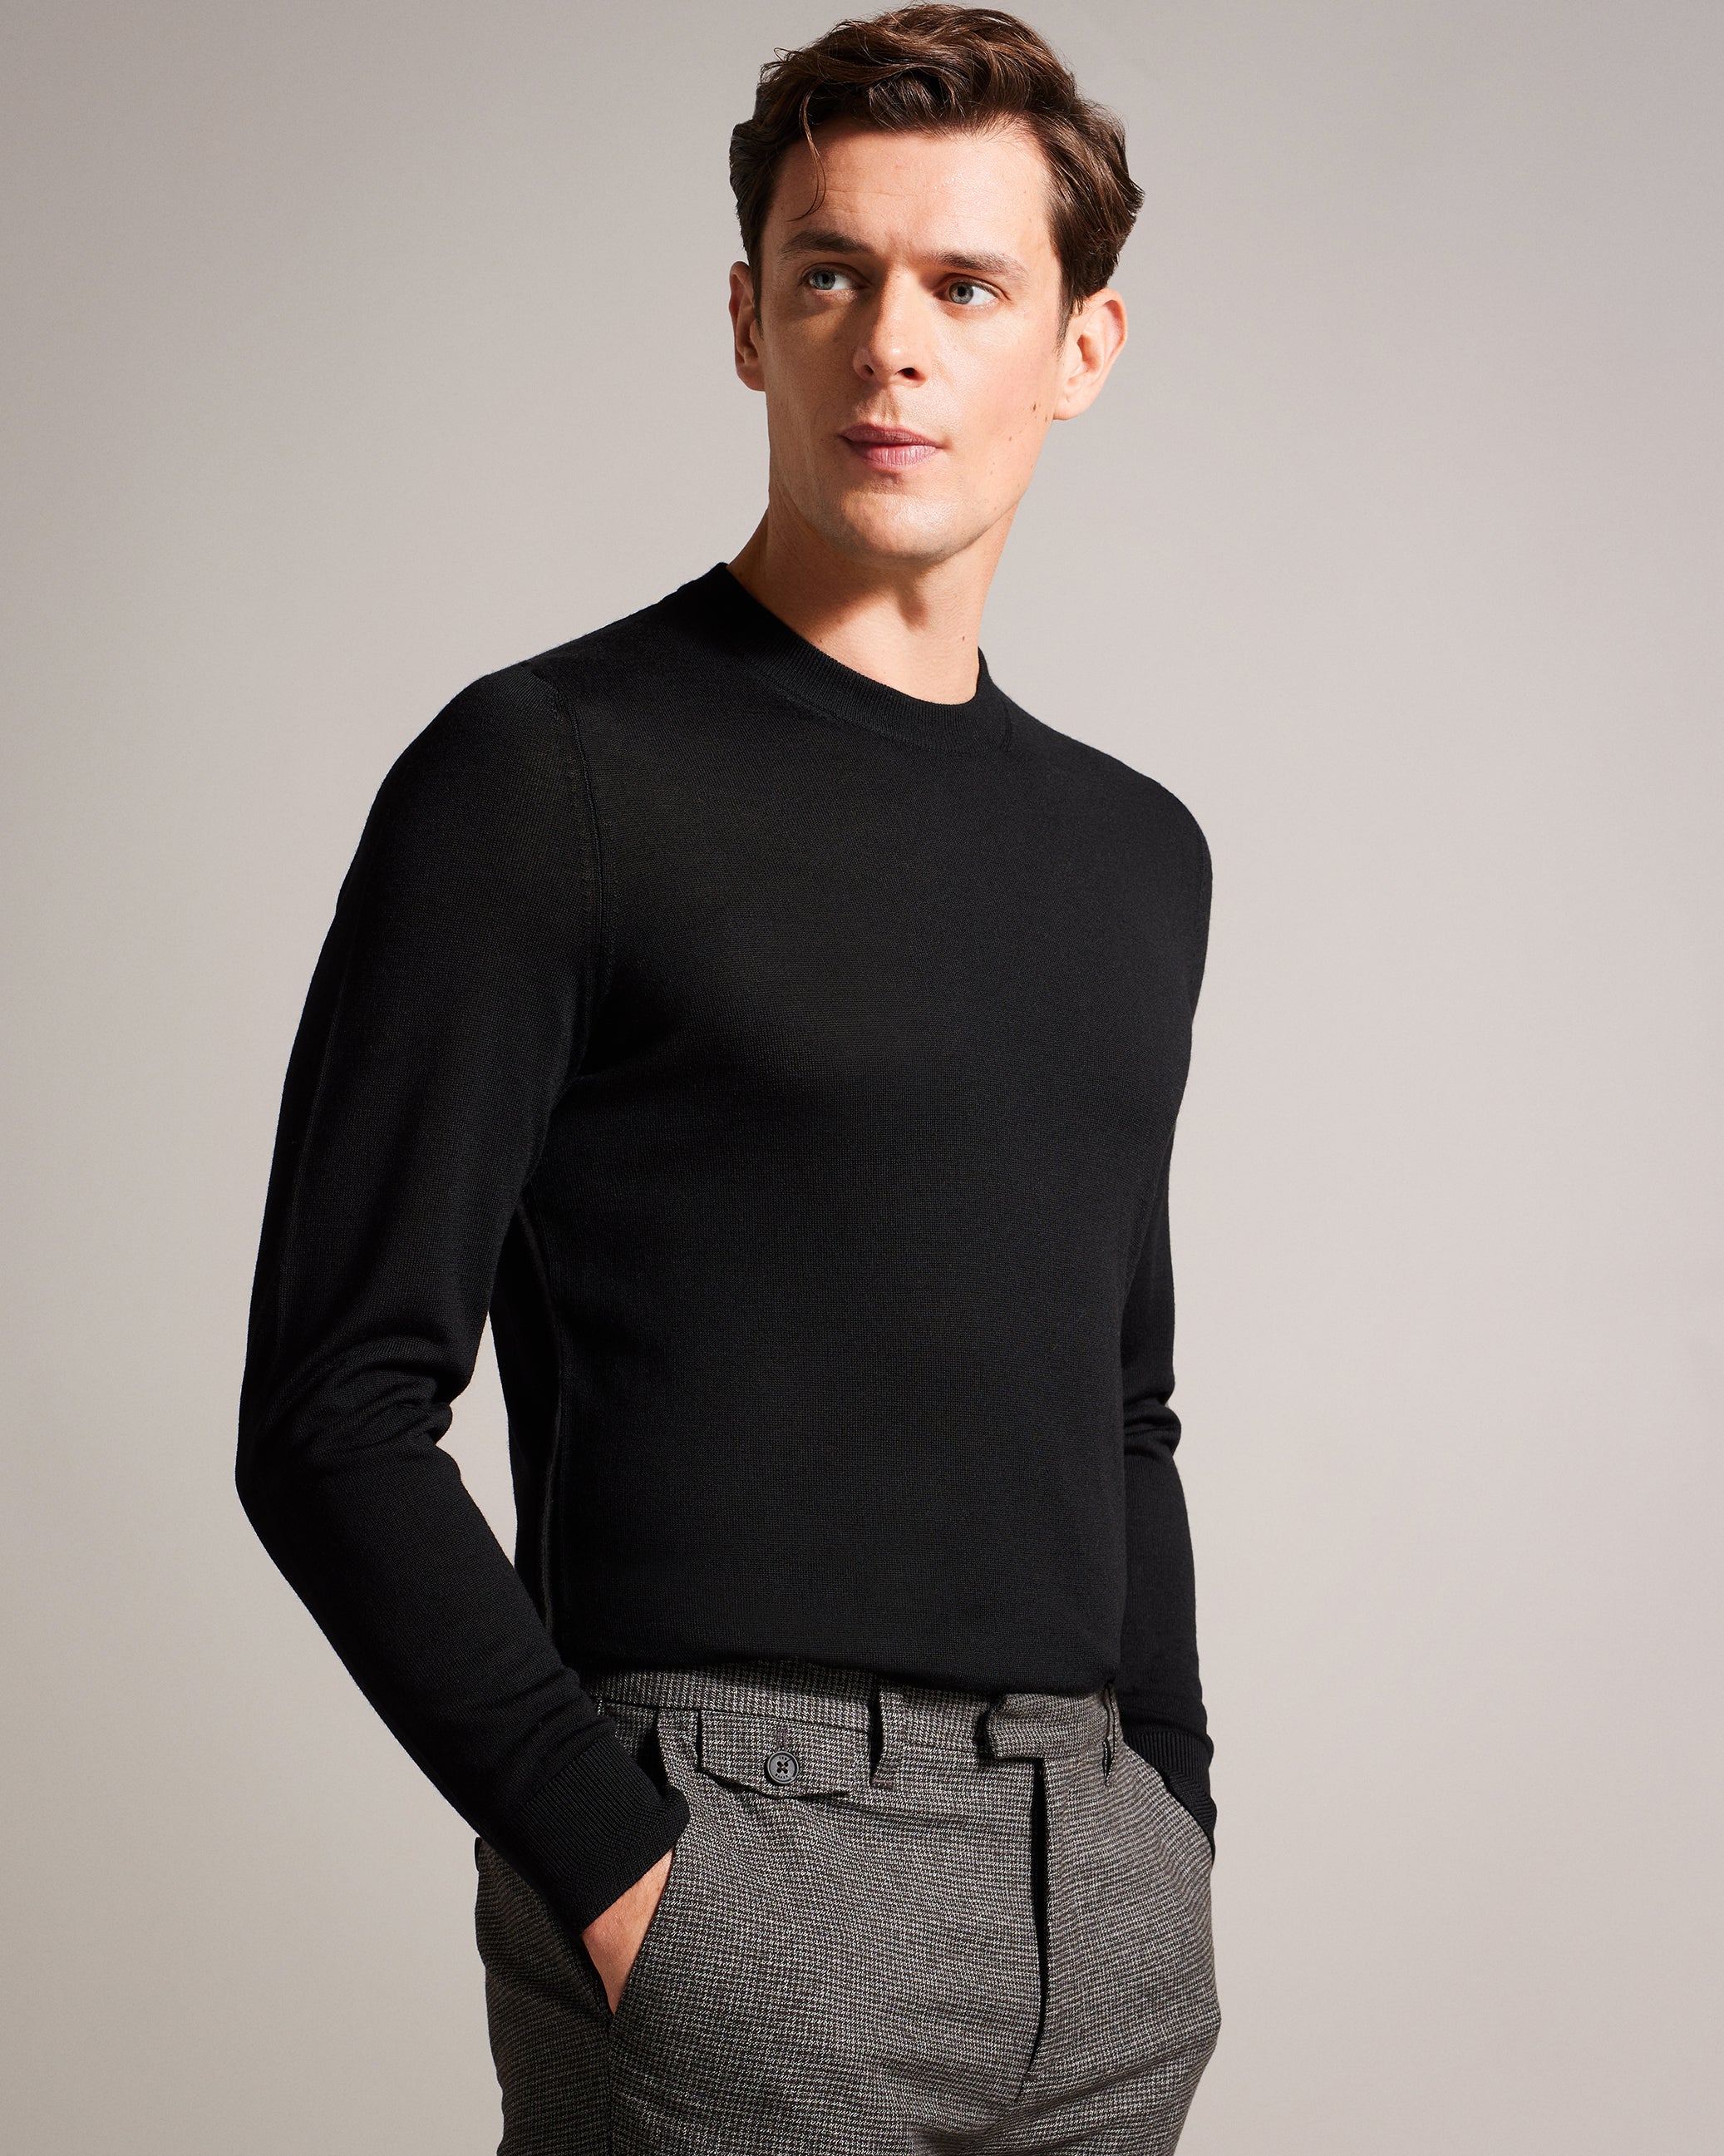 CARNBY - LS Core Crew Neck – Ted Baker, United States